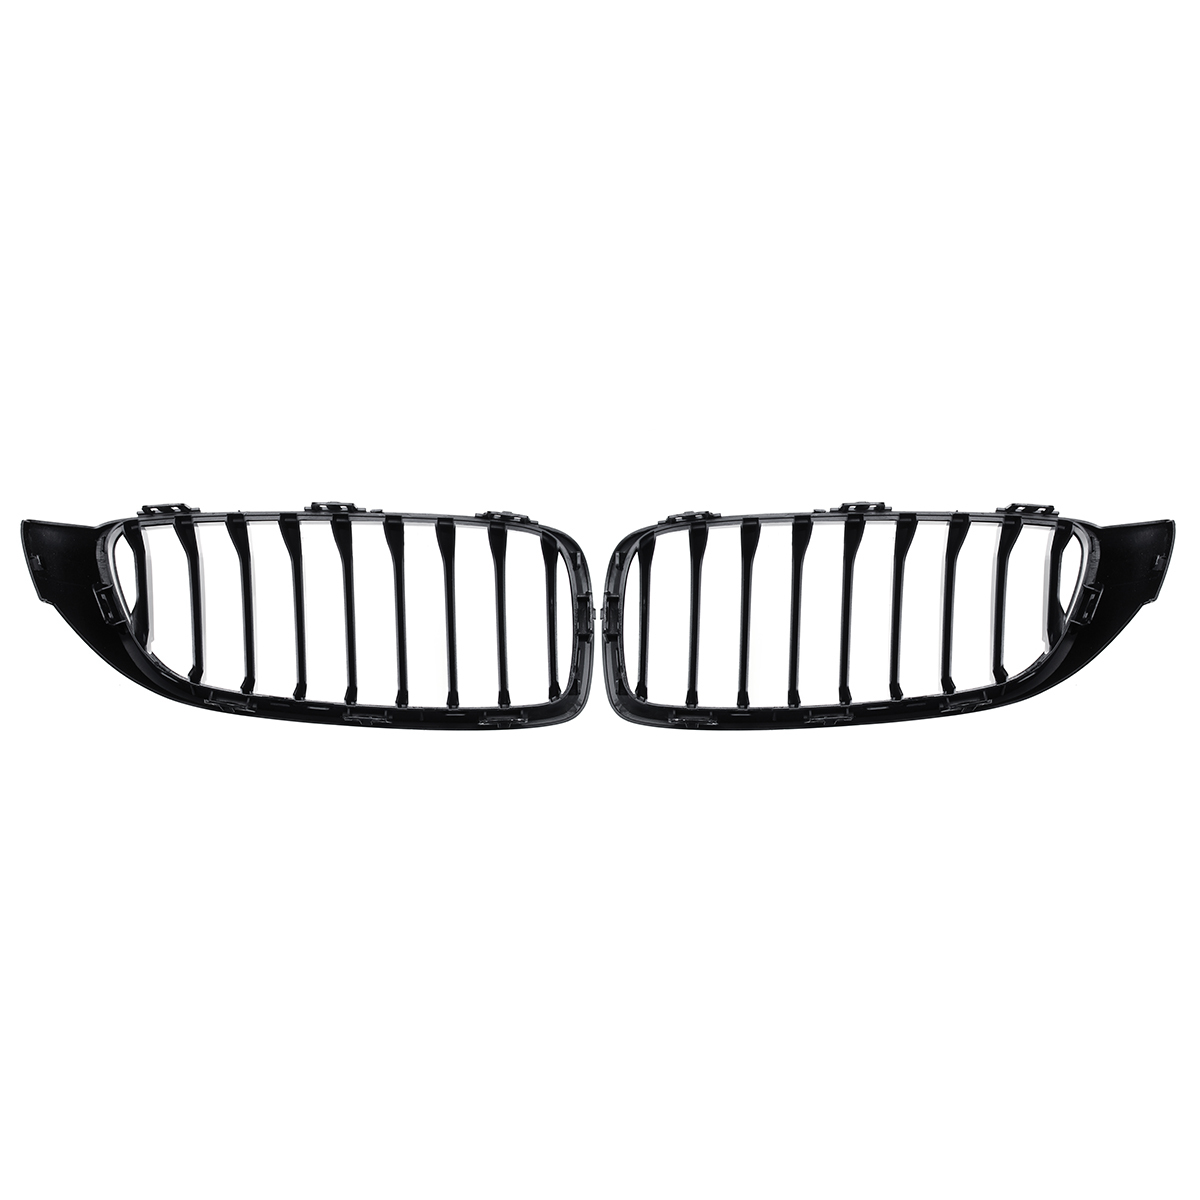 Car Gloss Black Kidney Grill Grille For BMW 4 Series F32 F33 F36 F82 Models Coupe 1